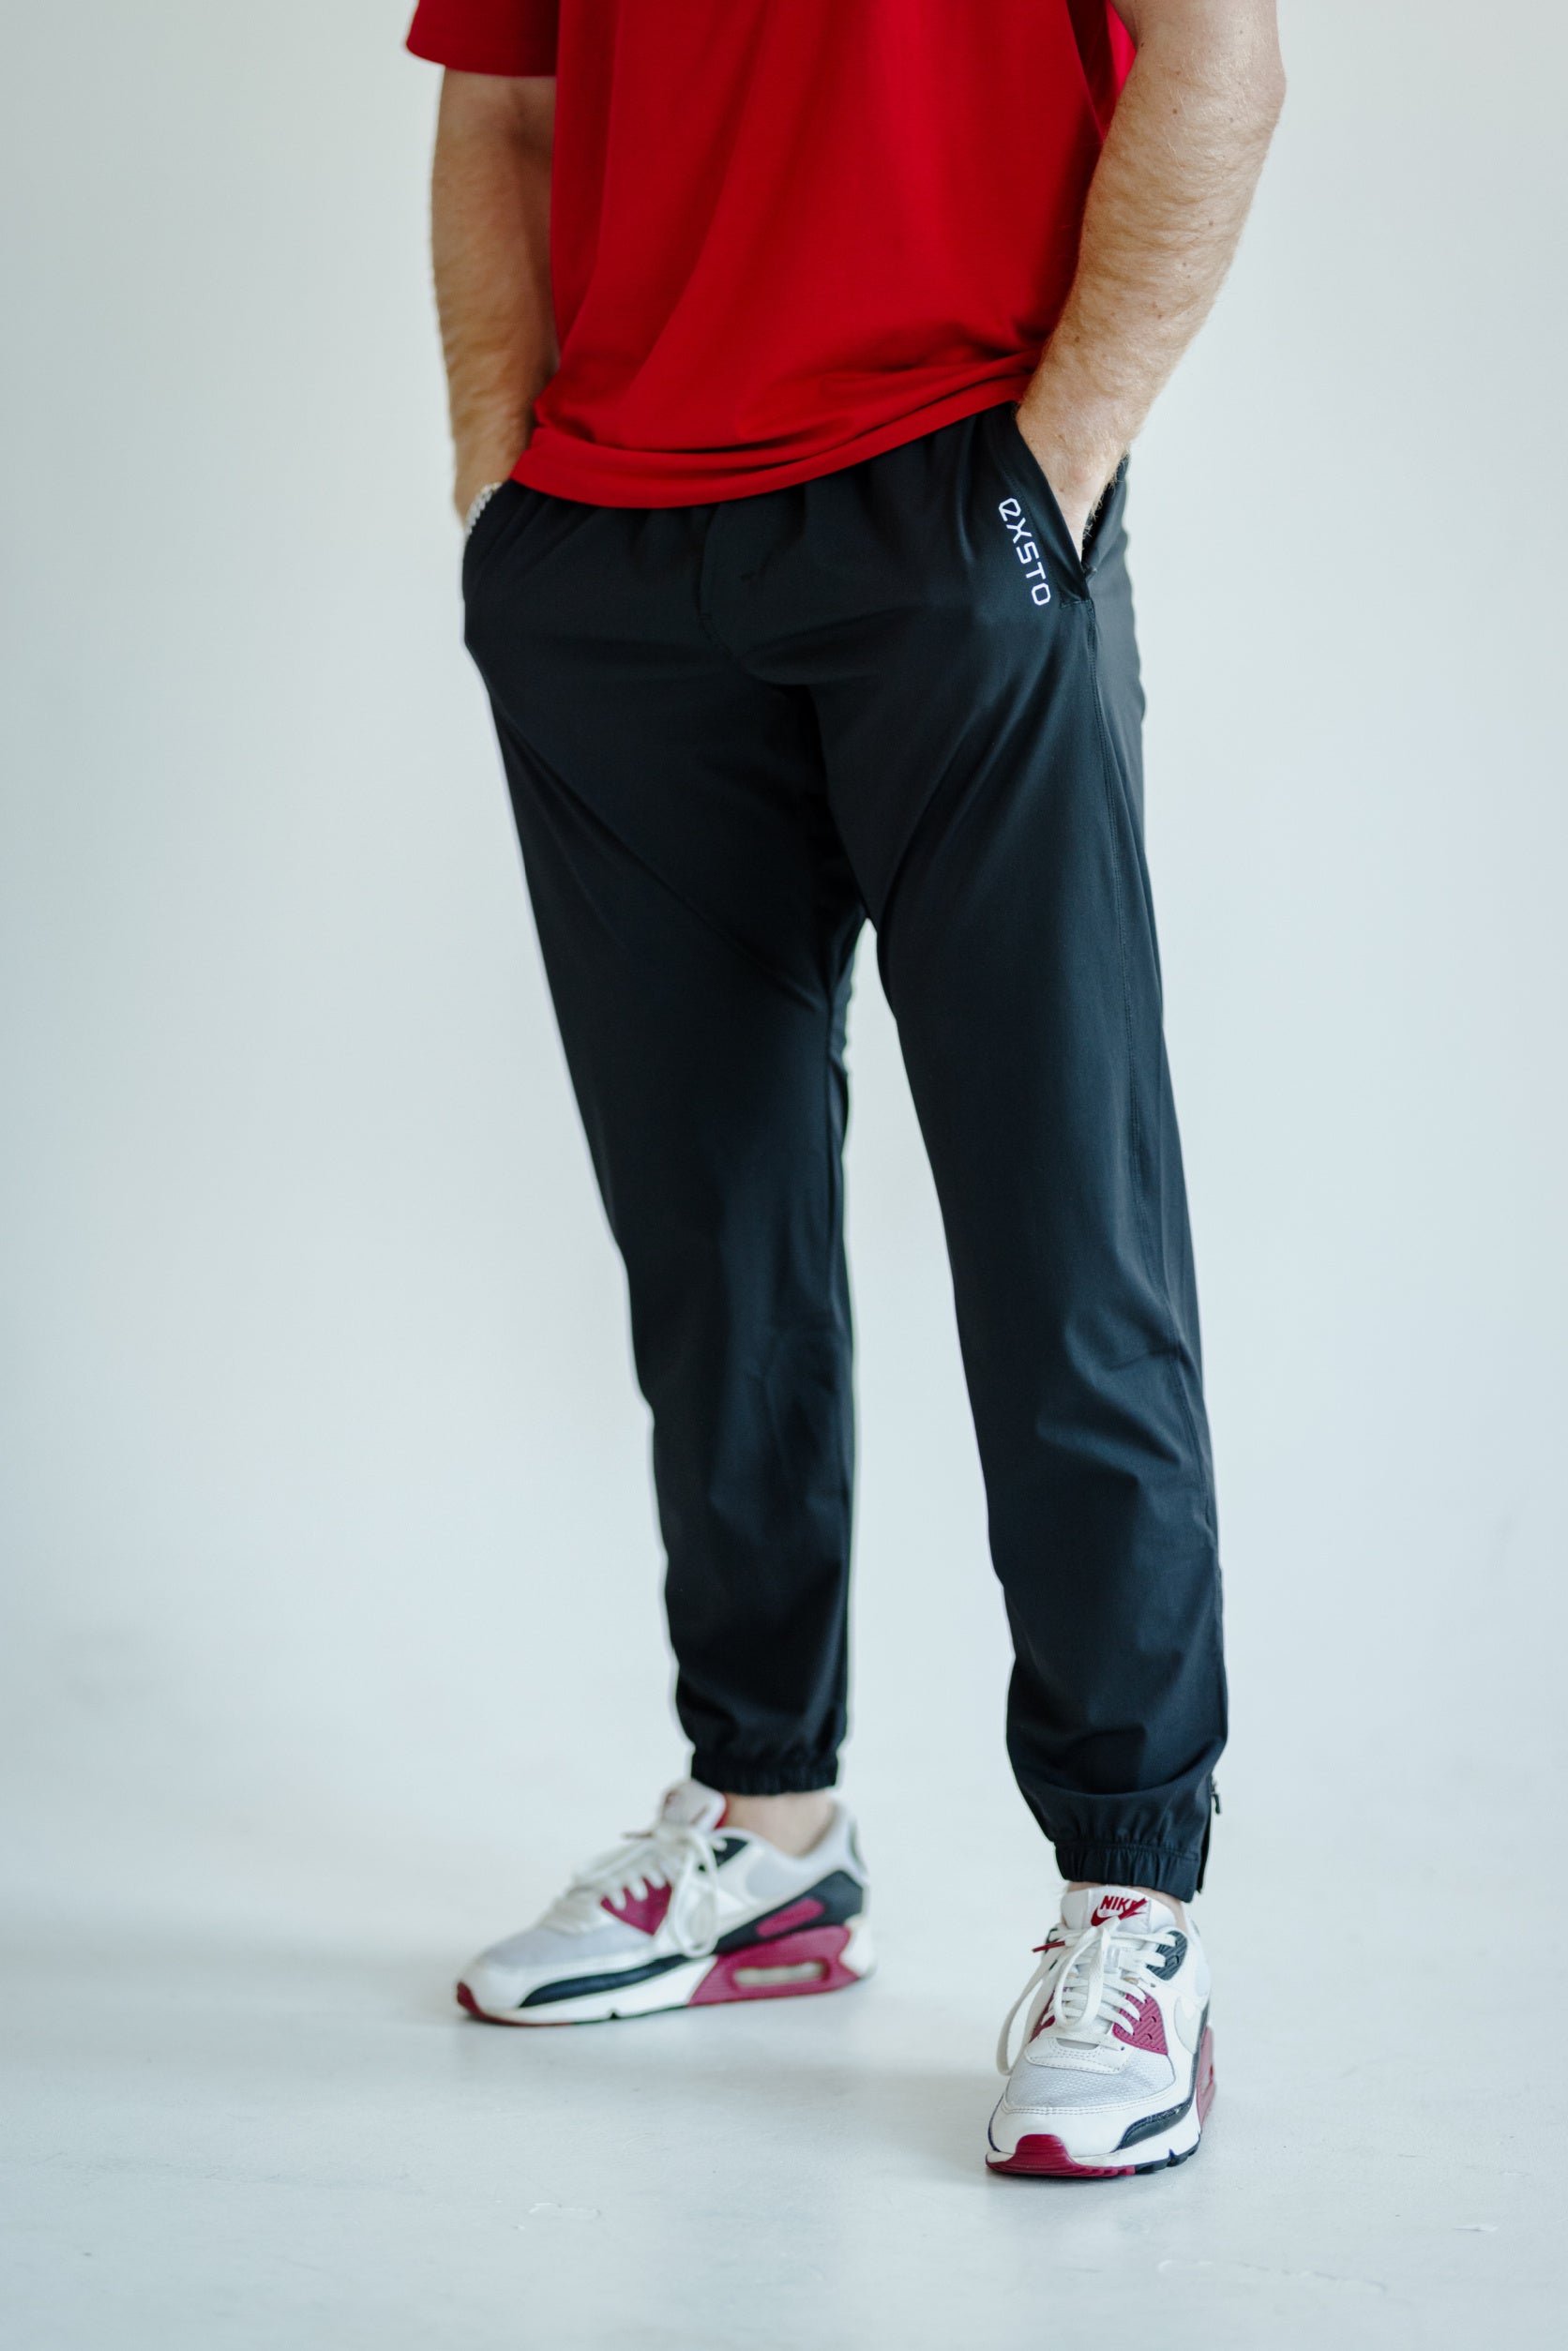 Buy NEVER LOSE Gym Track Pants Regular Fit Quick Dry Technology Workout  Sports Pants for Men's Online In India At Discounted Prices